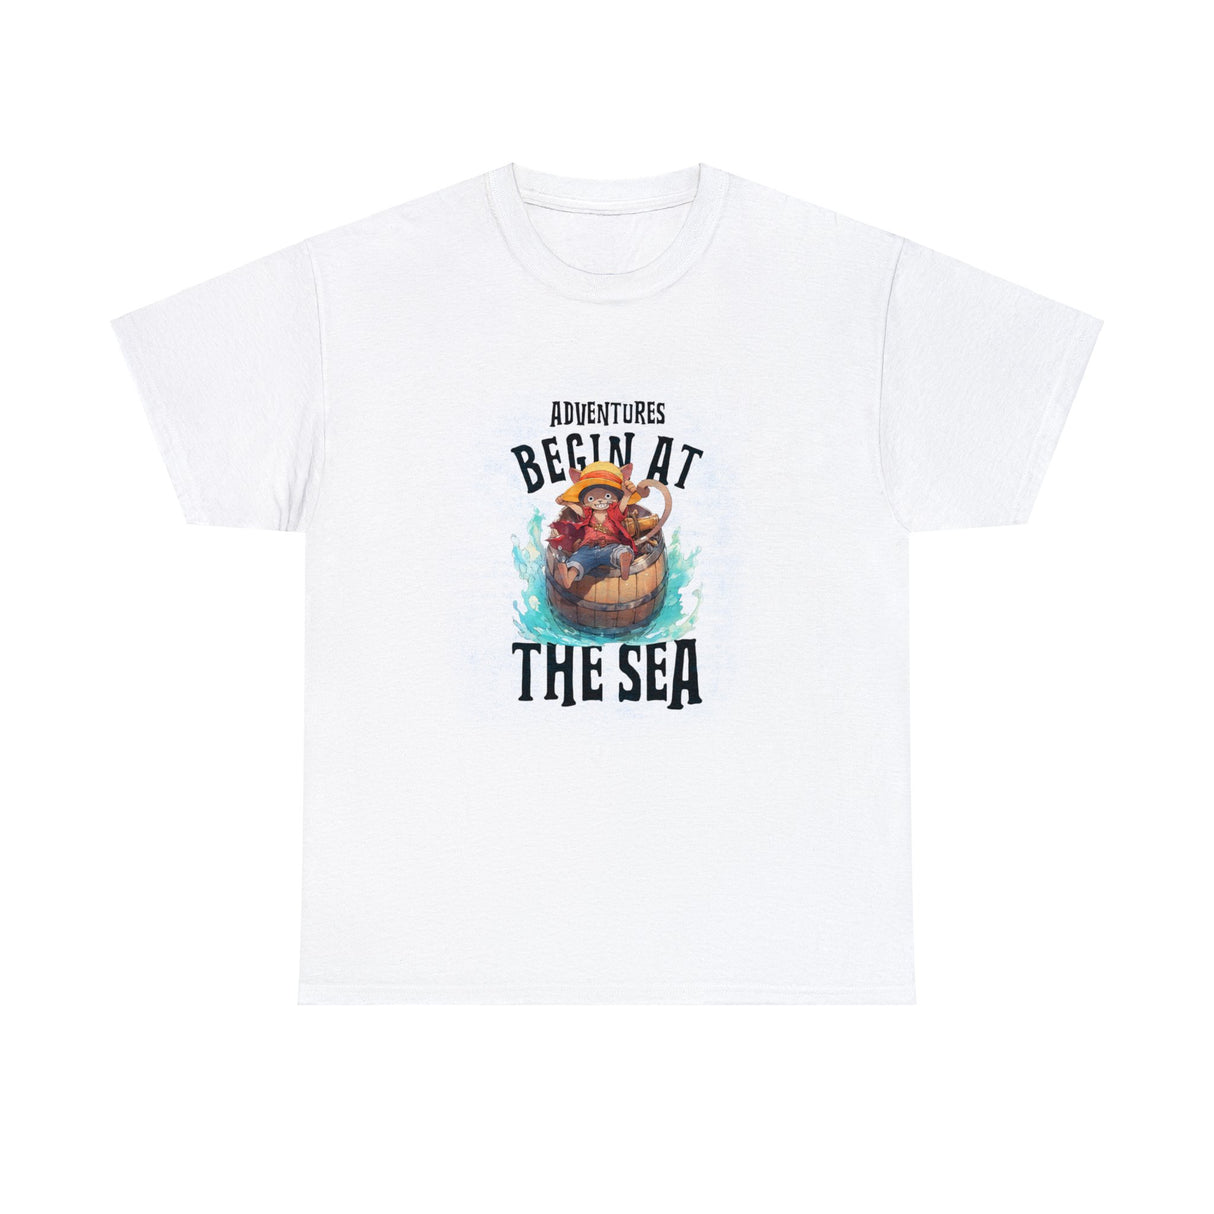 Adventures Begin At The Sea Graphic Tee Shirt